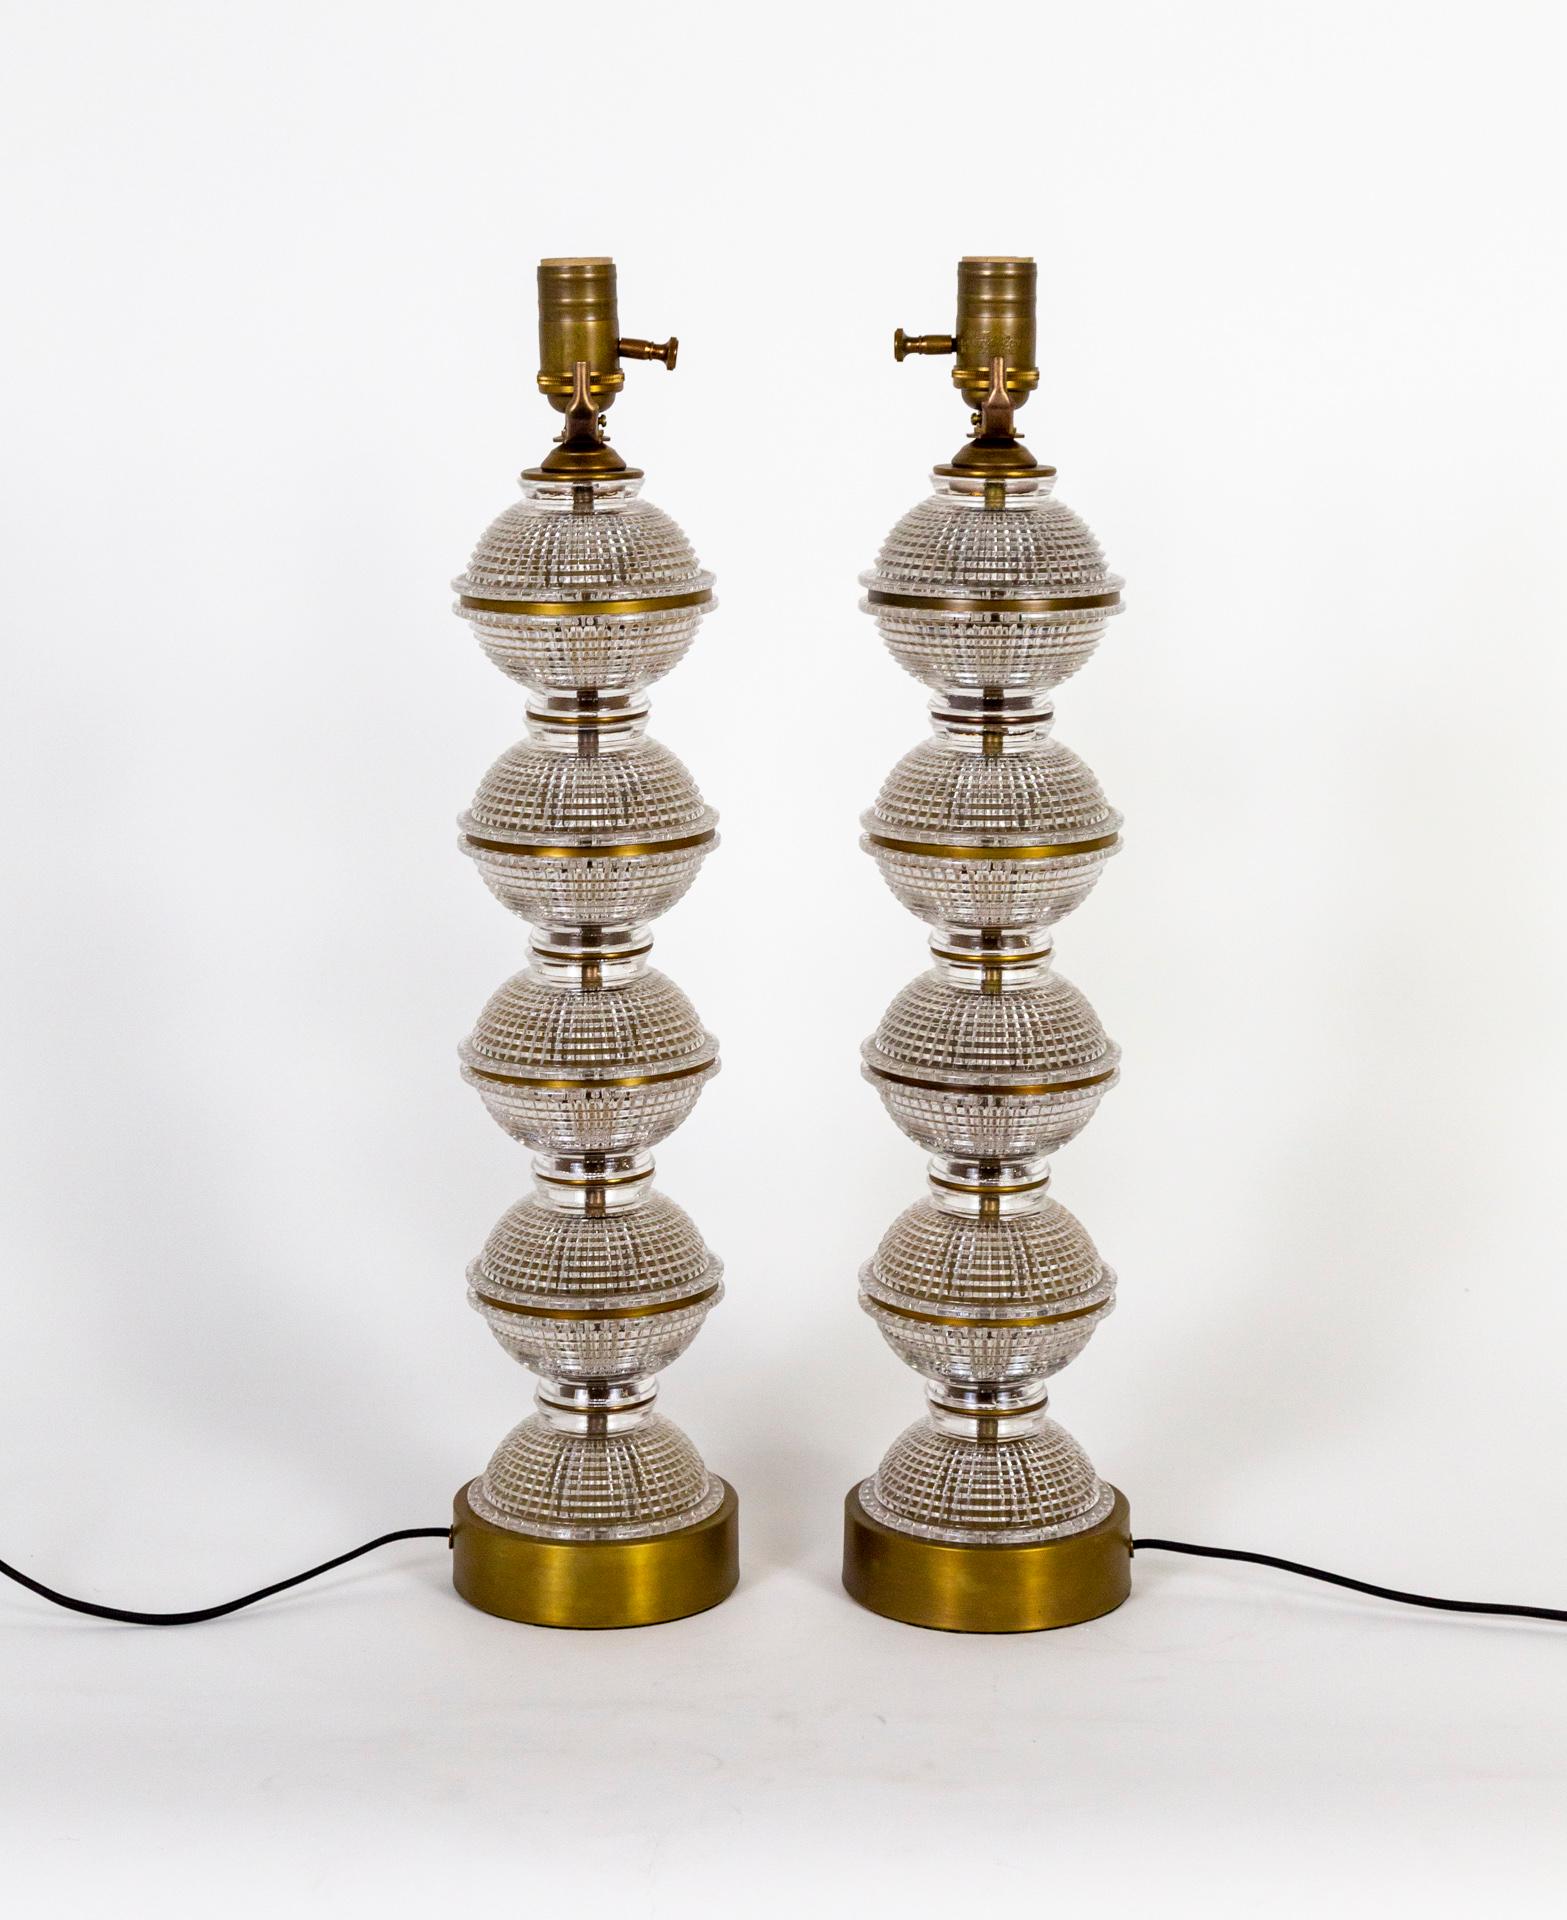 A pair of custom-made table lamps with antique, quilted glass forming spheres that are banded with thin, brass rings. They are stacked on a complimentary brass base, with sockets in matching tones. With dimmers on the sockets. Made with new brass